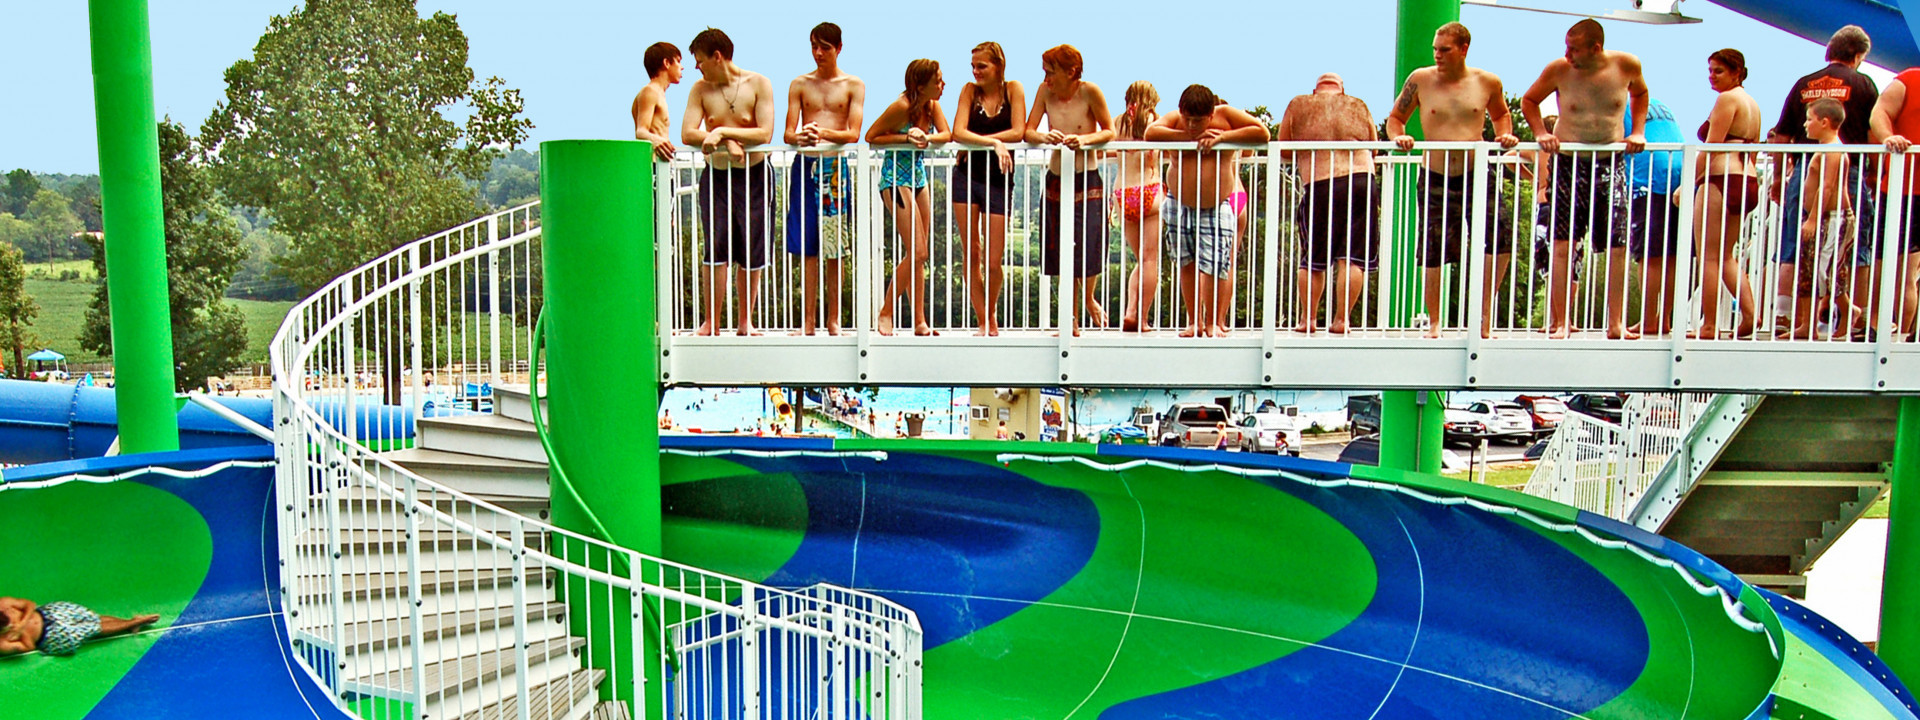 12 Things Every Waterpark Should Have